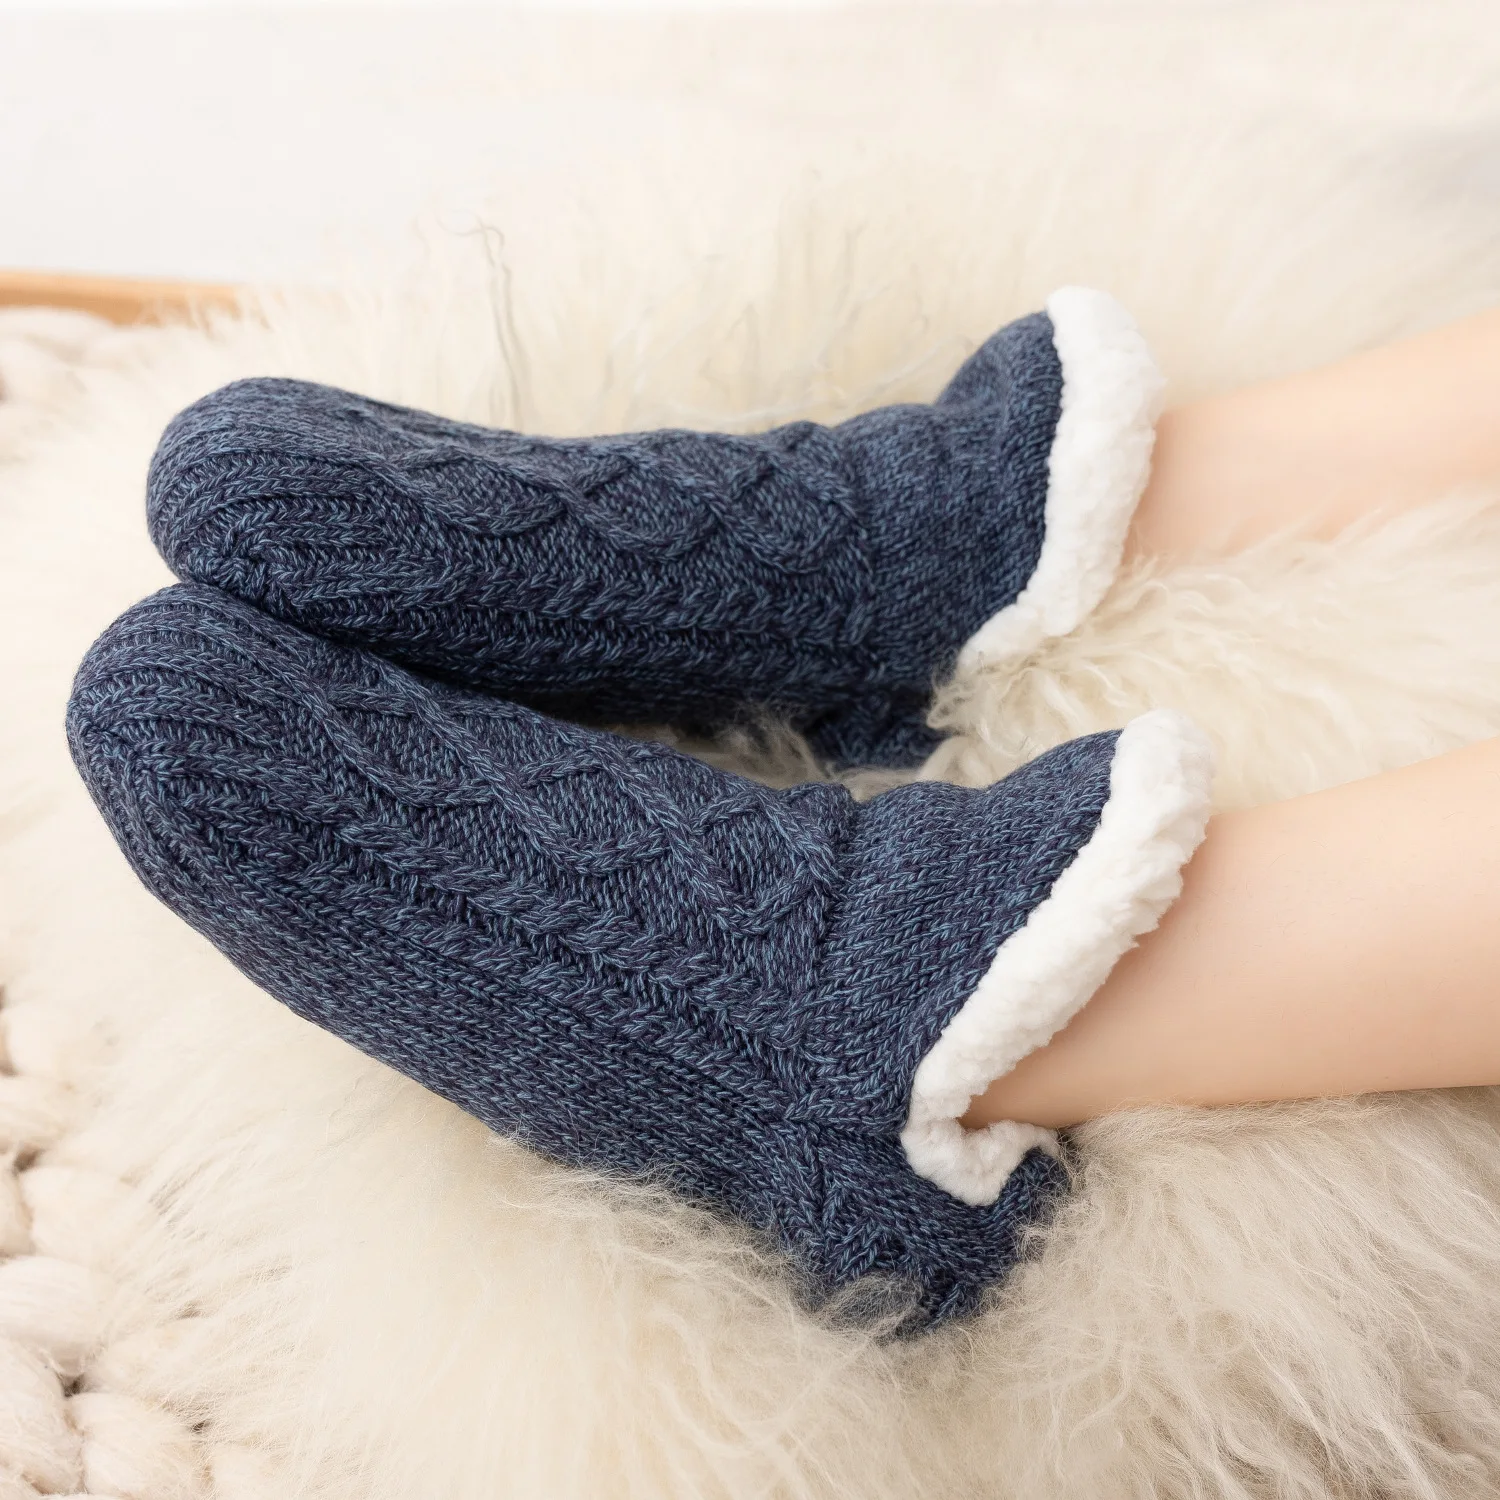 Cmax New Thick Thermal Indoor Home Fuzzy Winter Warm Fluffy Soft Cozy ...